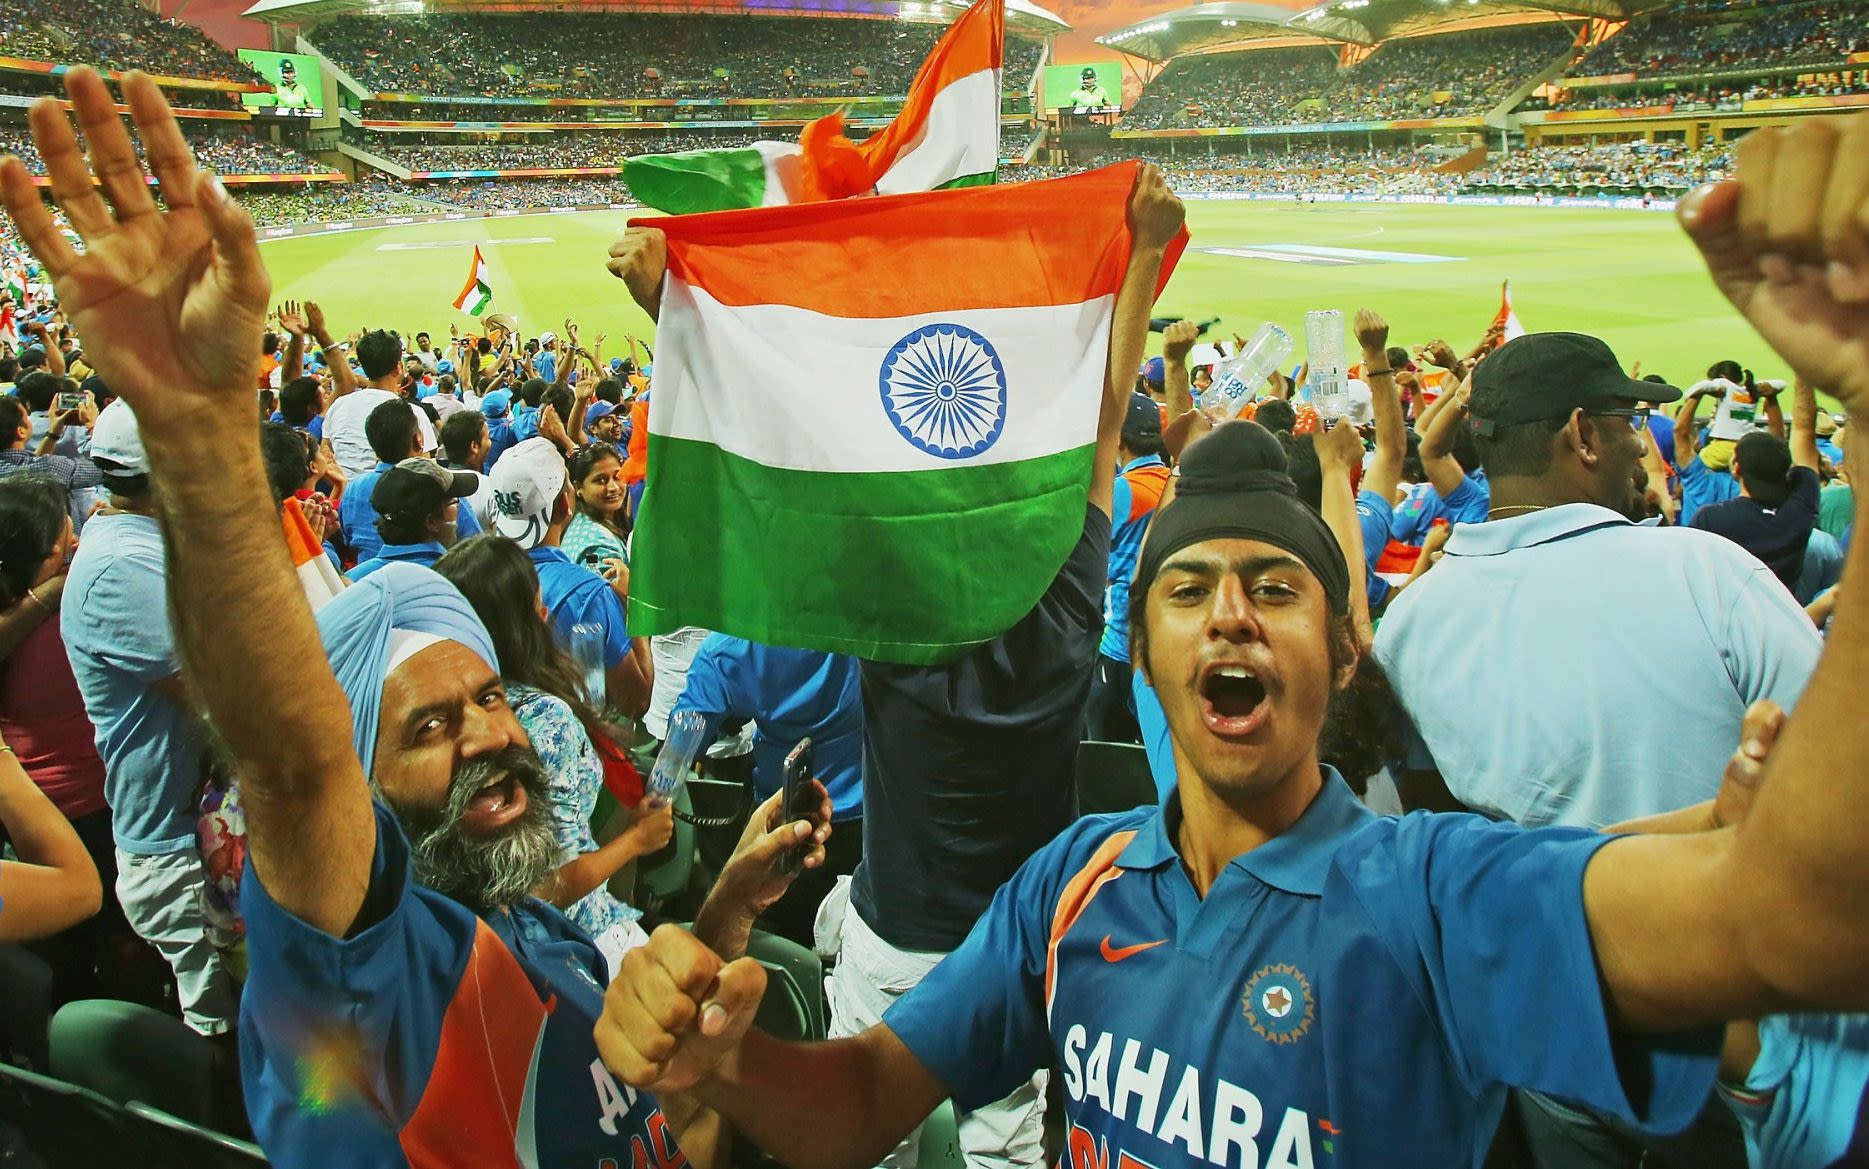 T20 World Cup is set up for Indian TV, not local fans